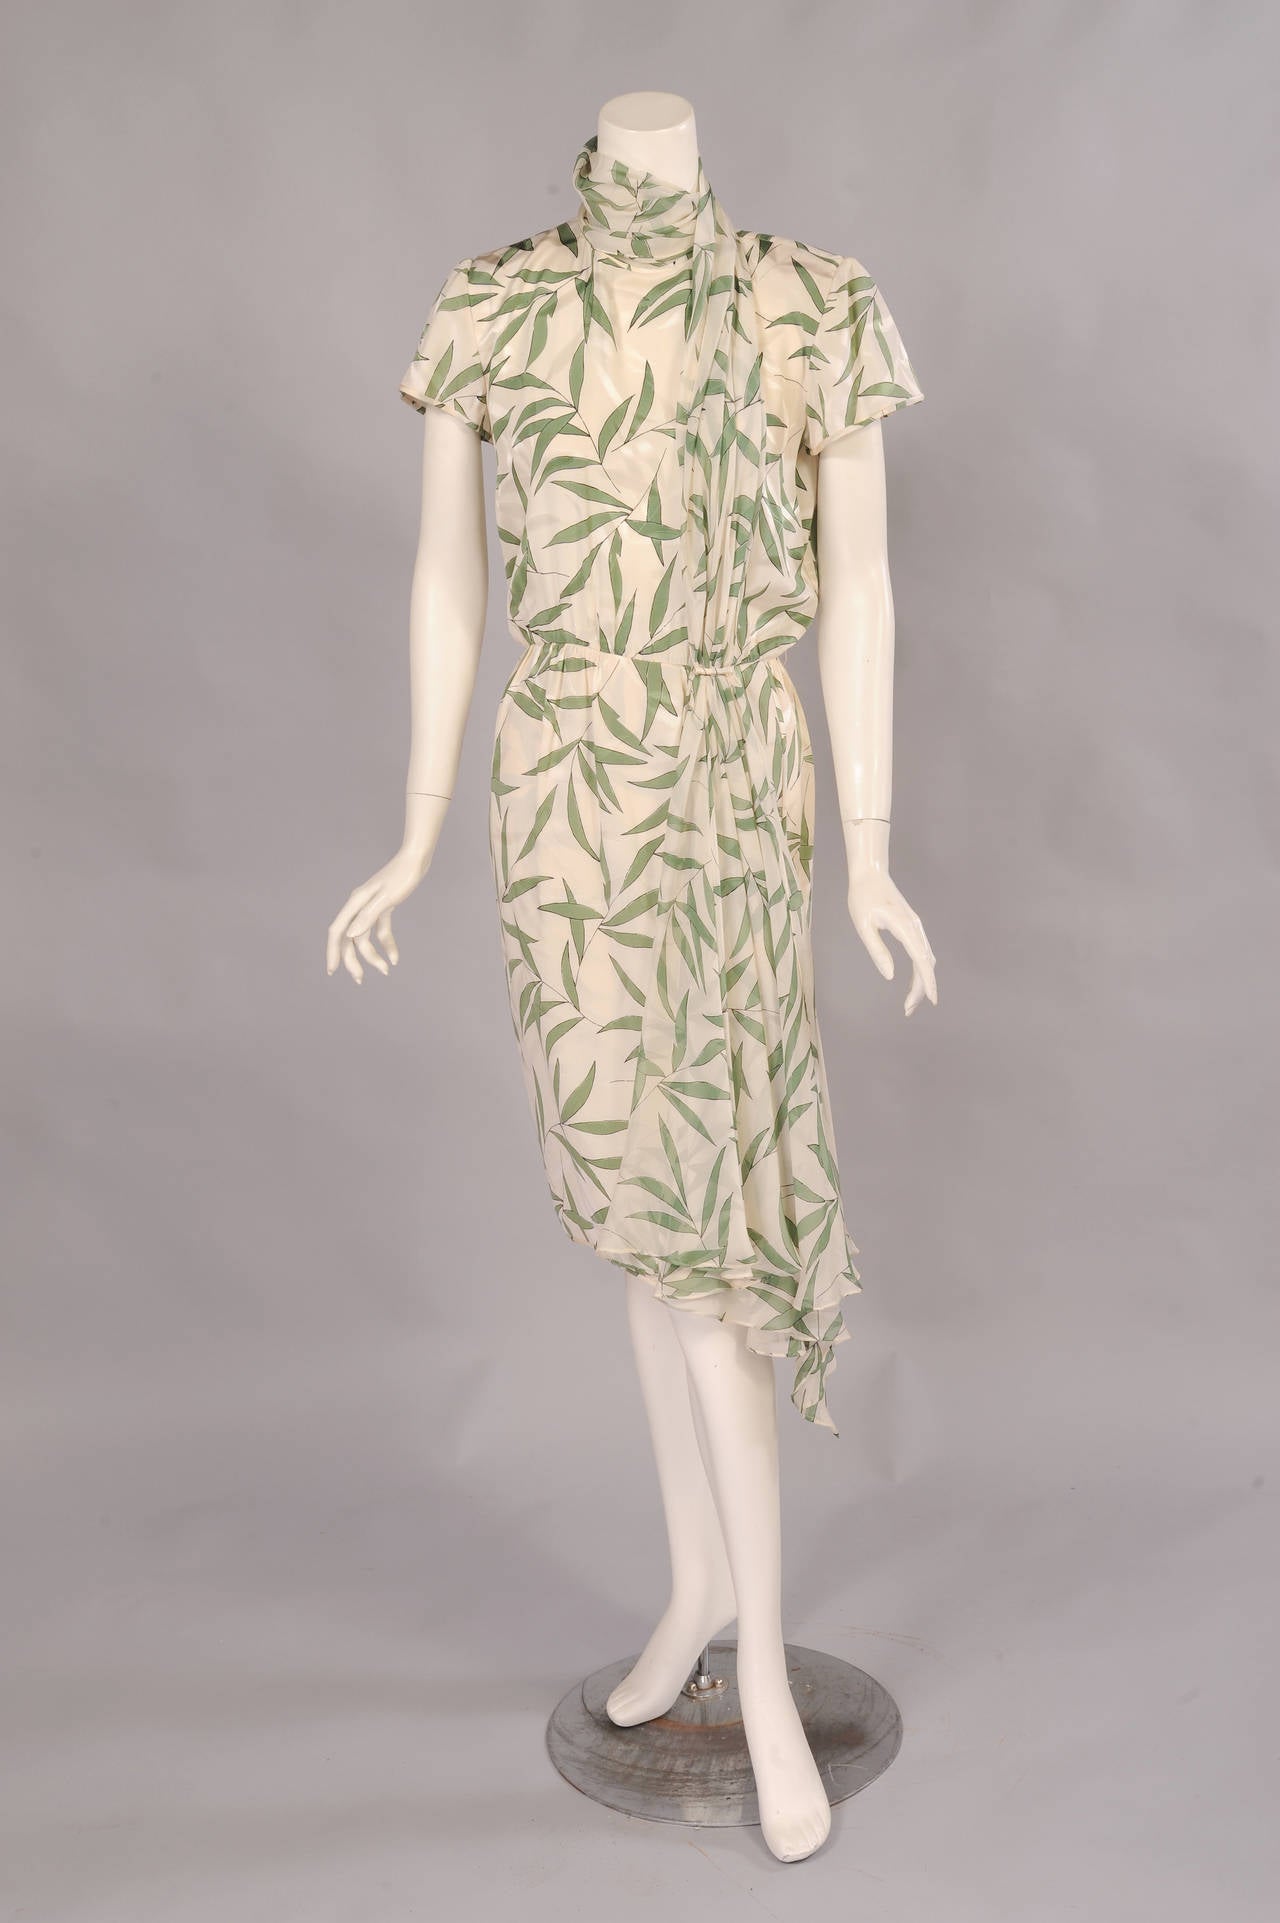 White  on white woven bamboo and green on white printed bamboo leaves are combined on this silk dress and the attached silk  chiffon that wraps and drapes
from the neckline to the hem of the wrap skirt. The dress has three buttons above an opening